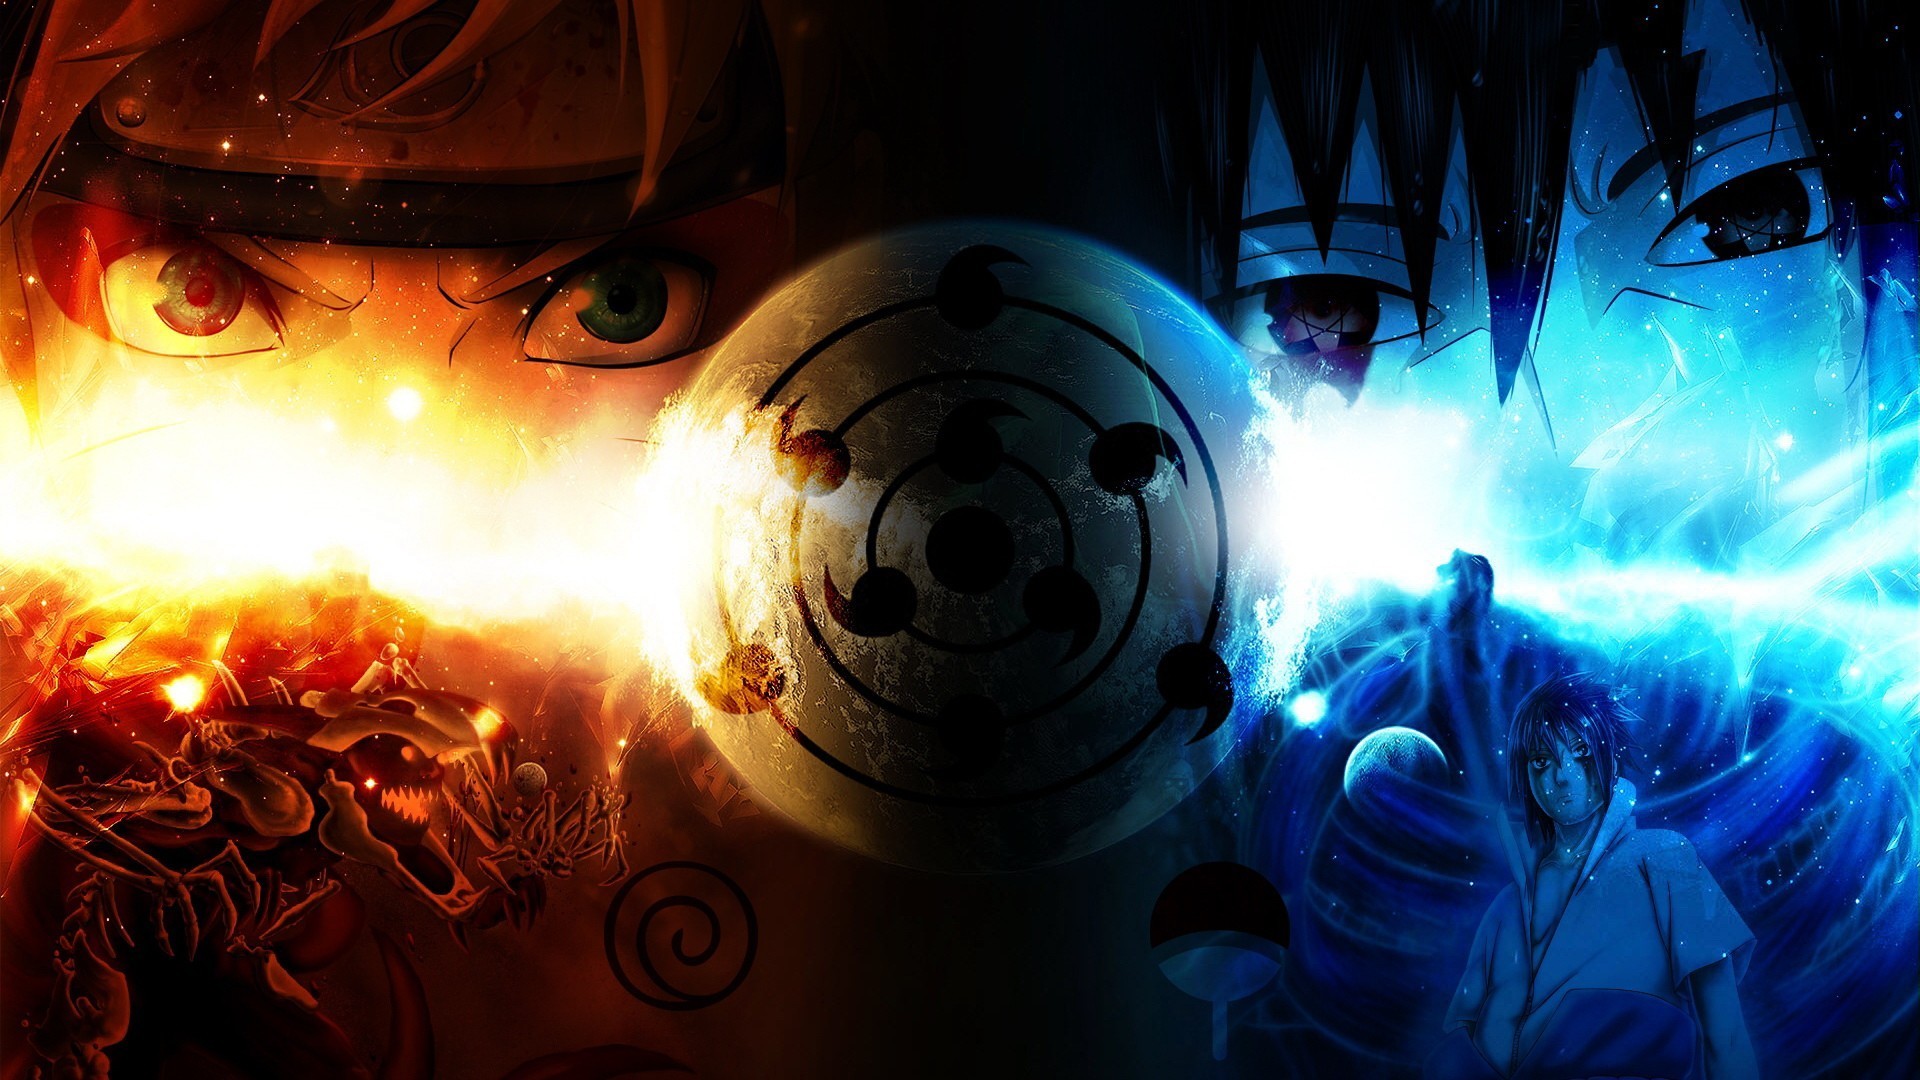 Naruto wallpaper ·① Download free awesome backgrounds for ...